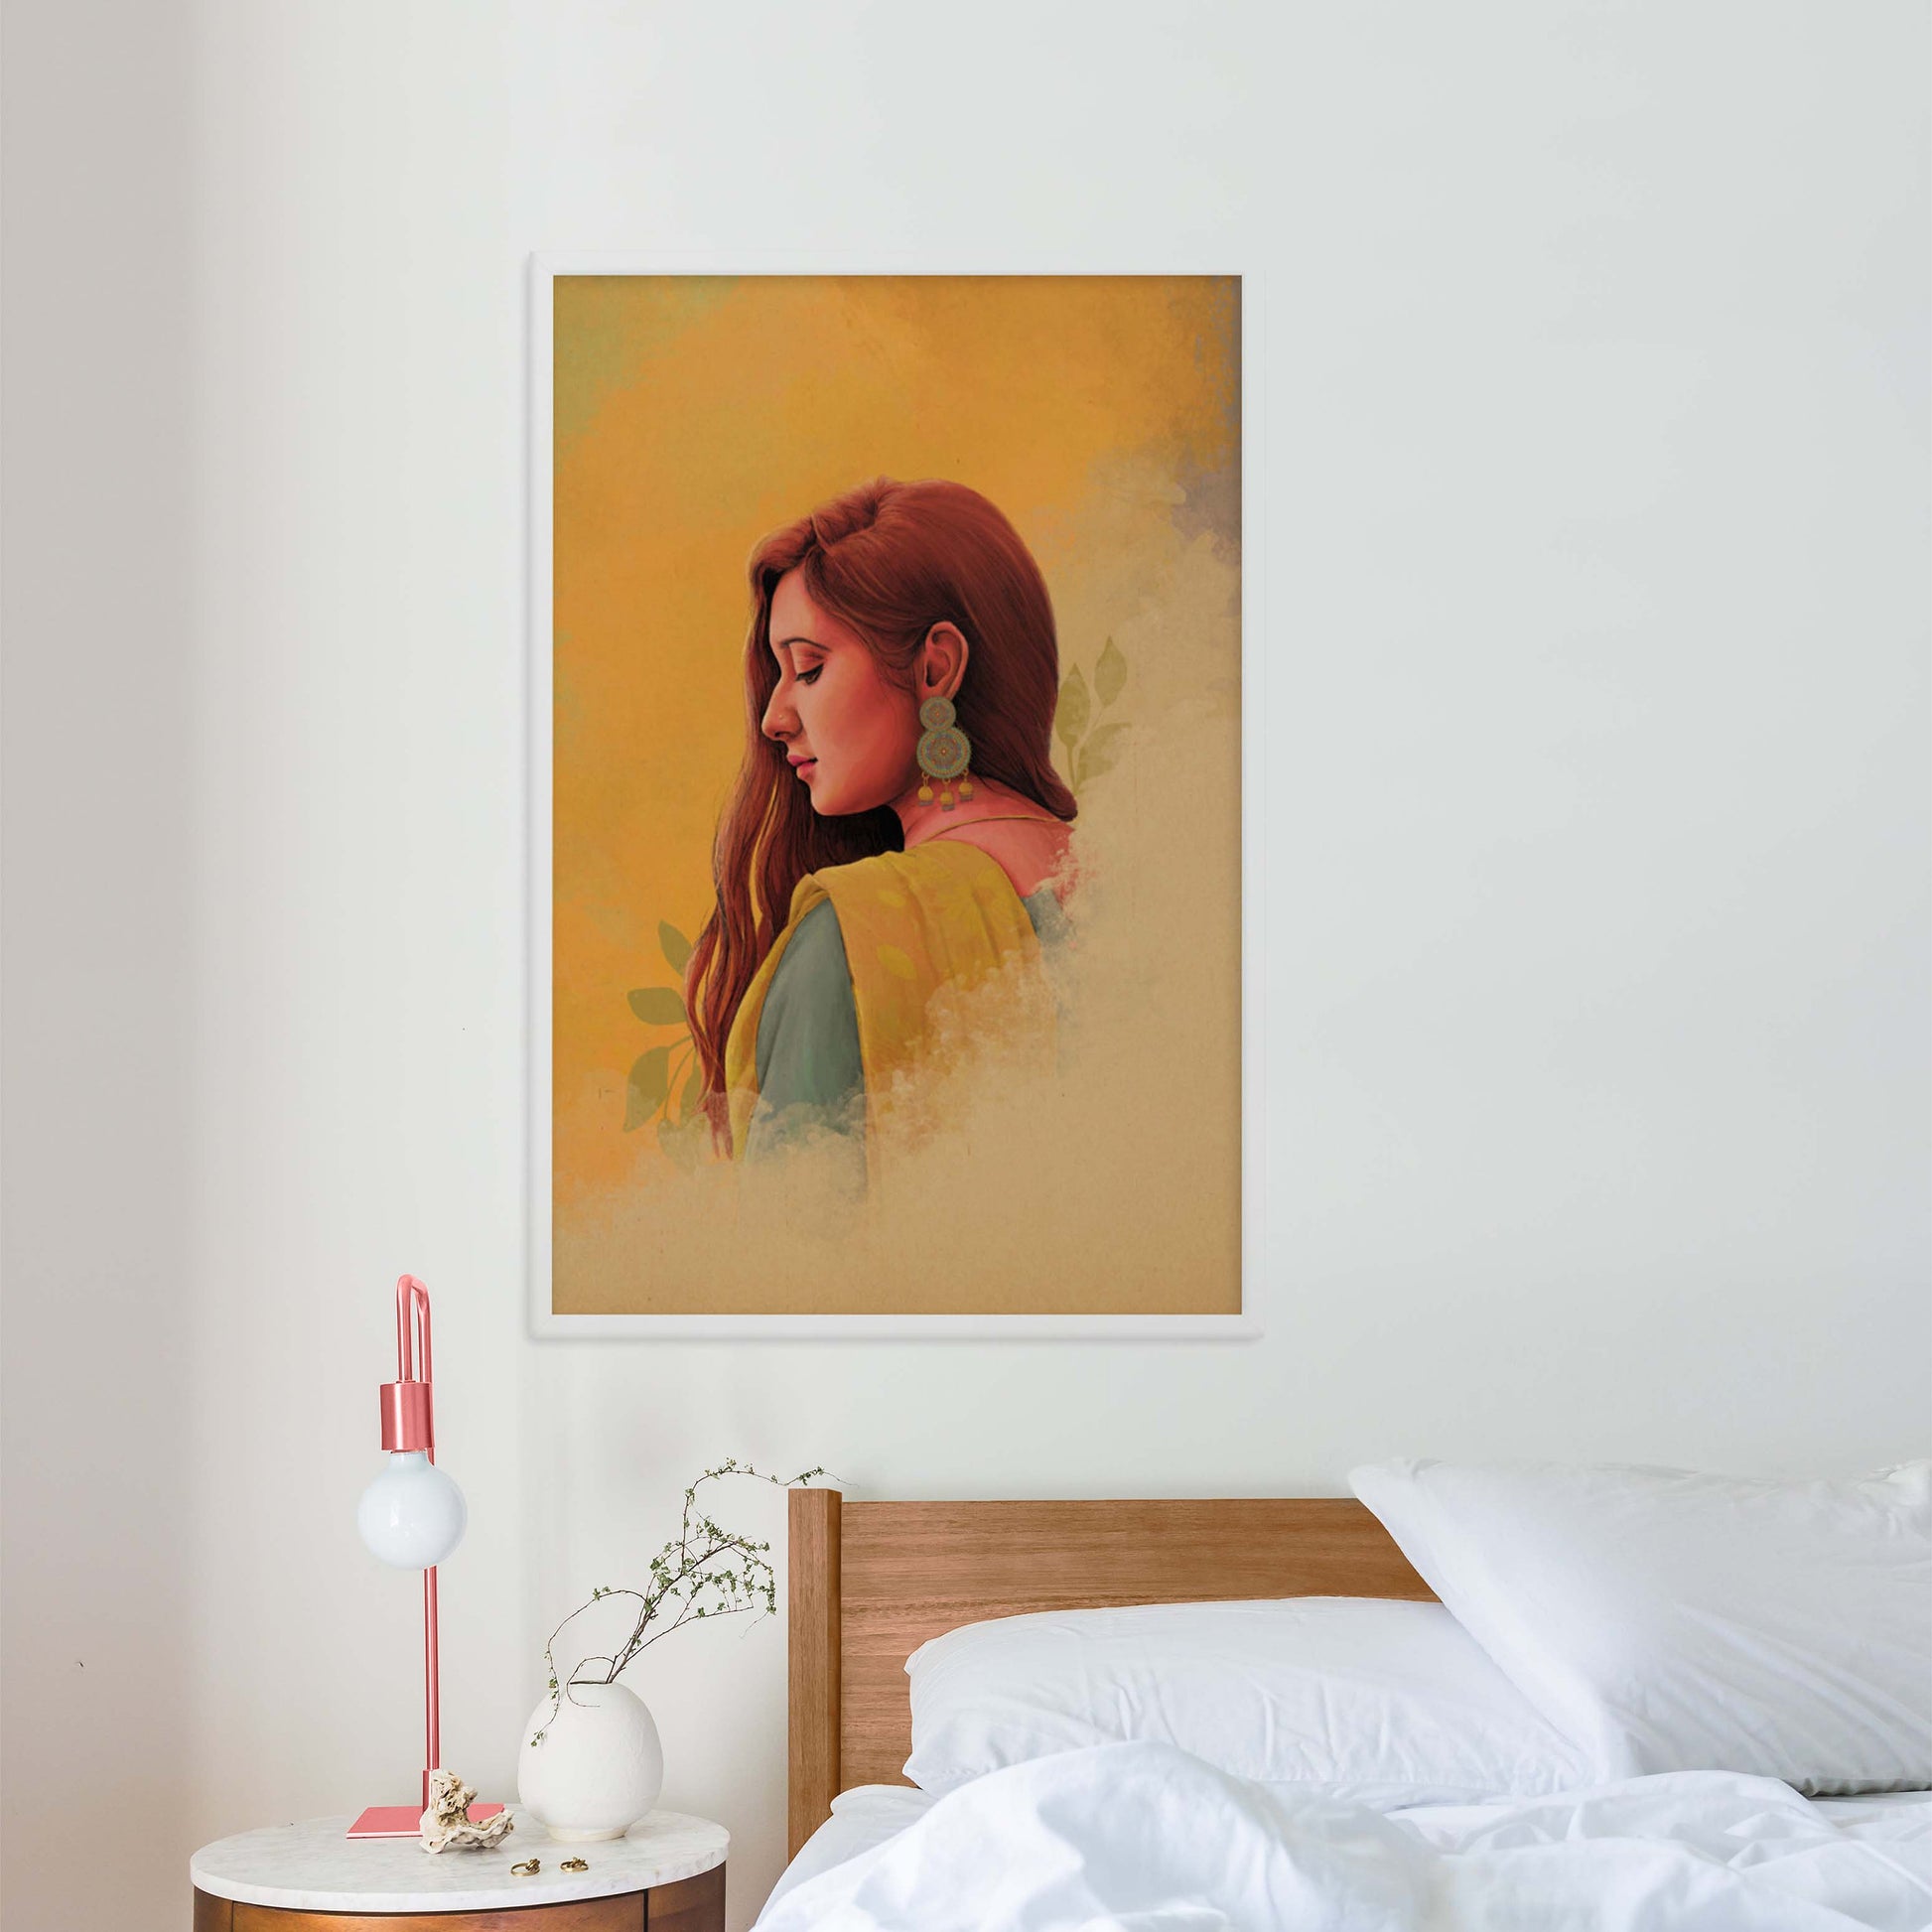 Indian Wall Art, Woman in Saree, Wall Art Decor, Canvas & Posters